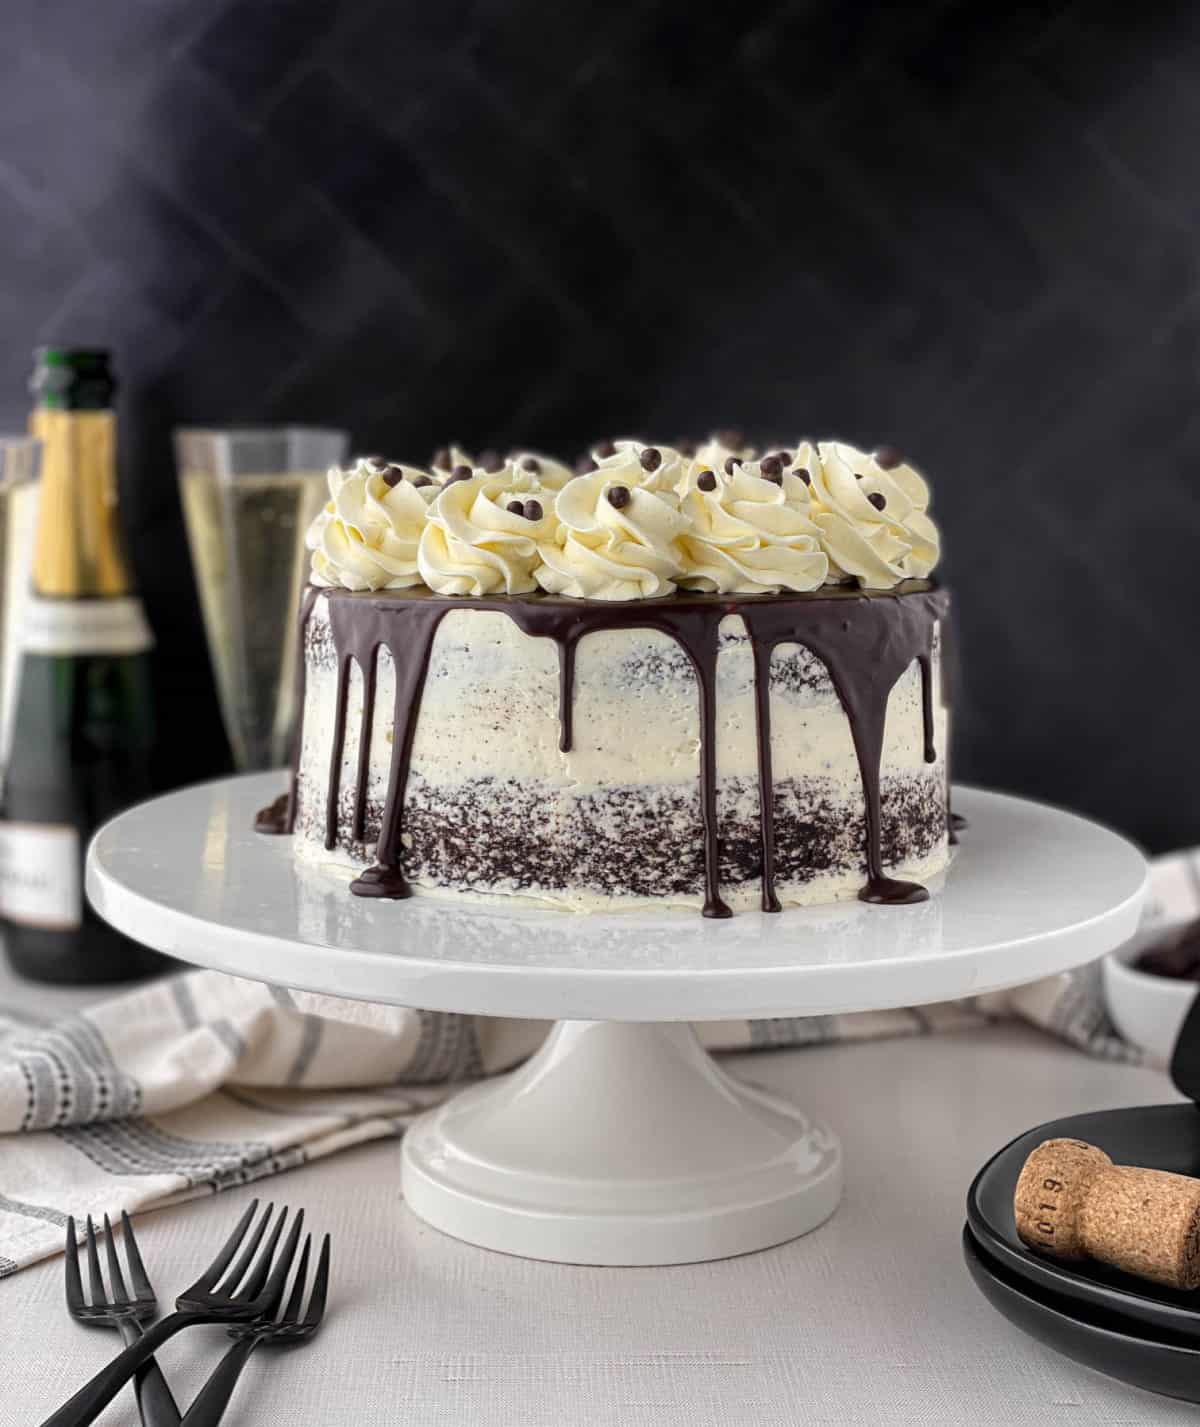 Chocolate Champagne Cake on a white cake stand.